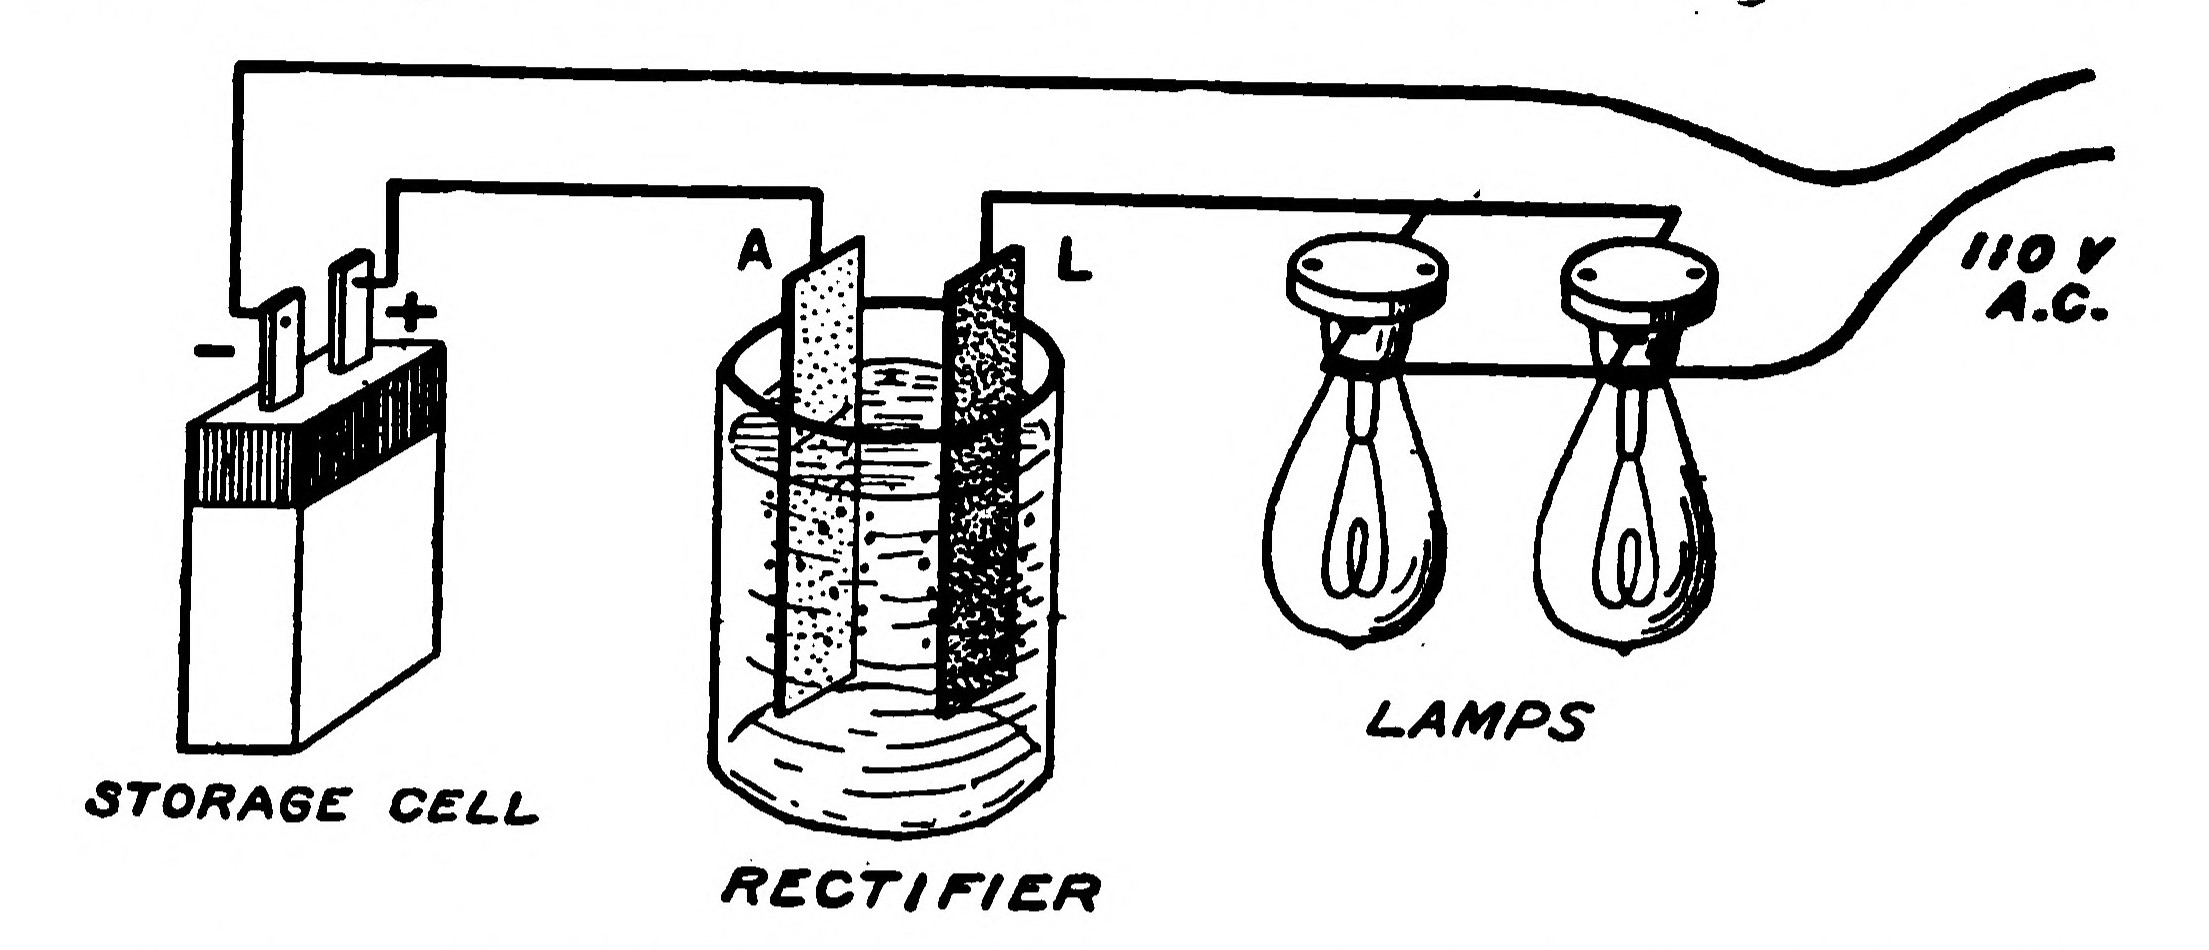 FIG. 54.—Circuit showing how a Single Cell of Rectifier should be connected in series with a Lamp Bank to Recharge a Storage Cell.